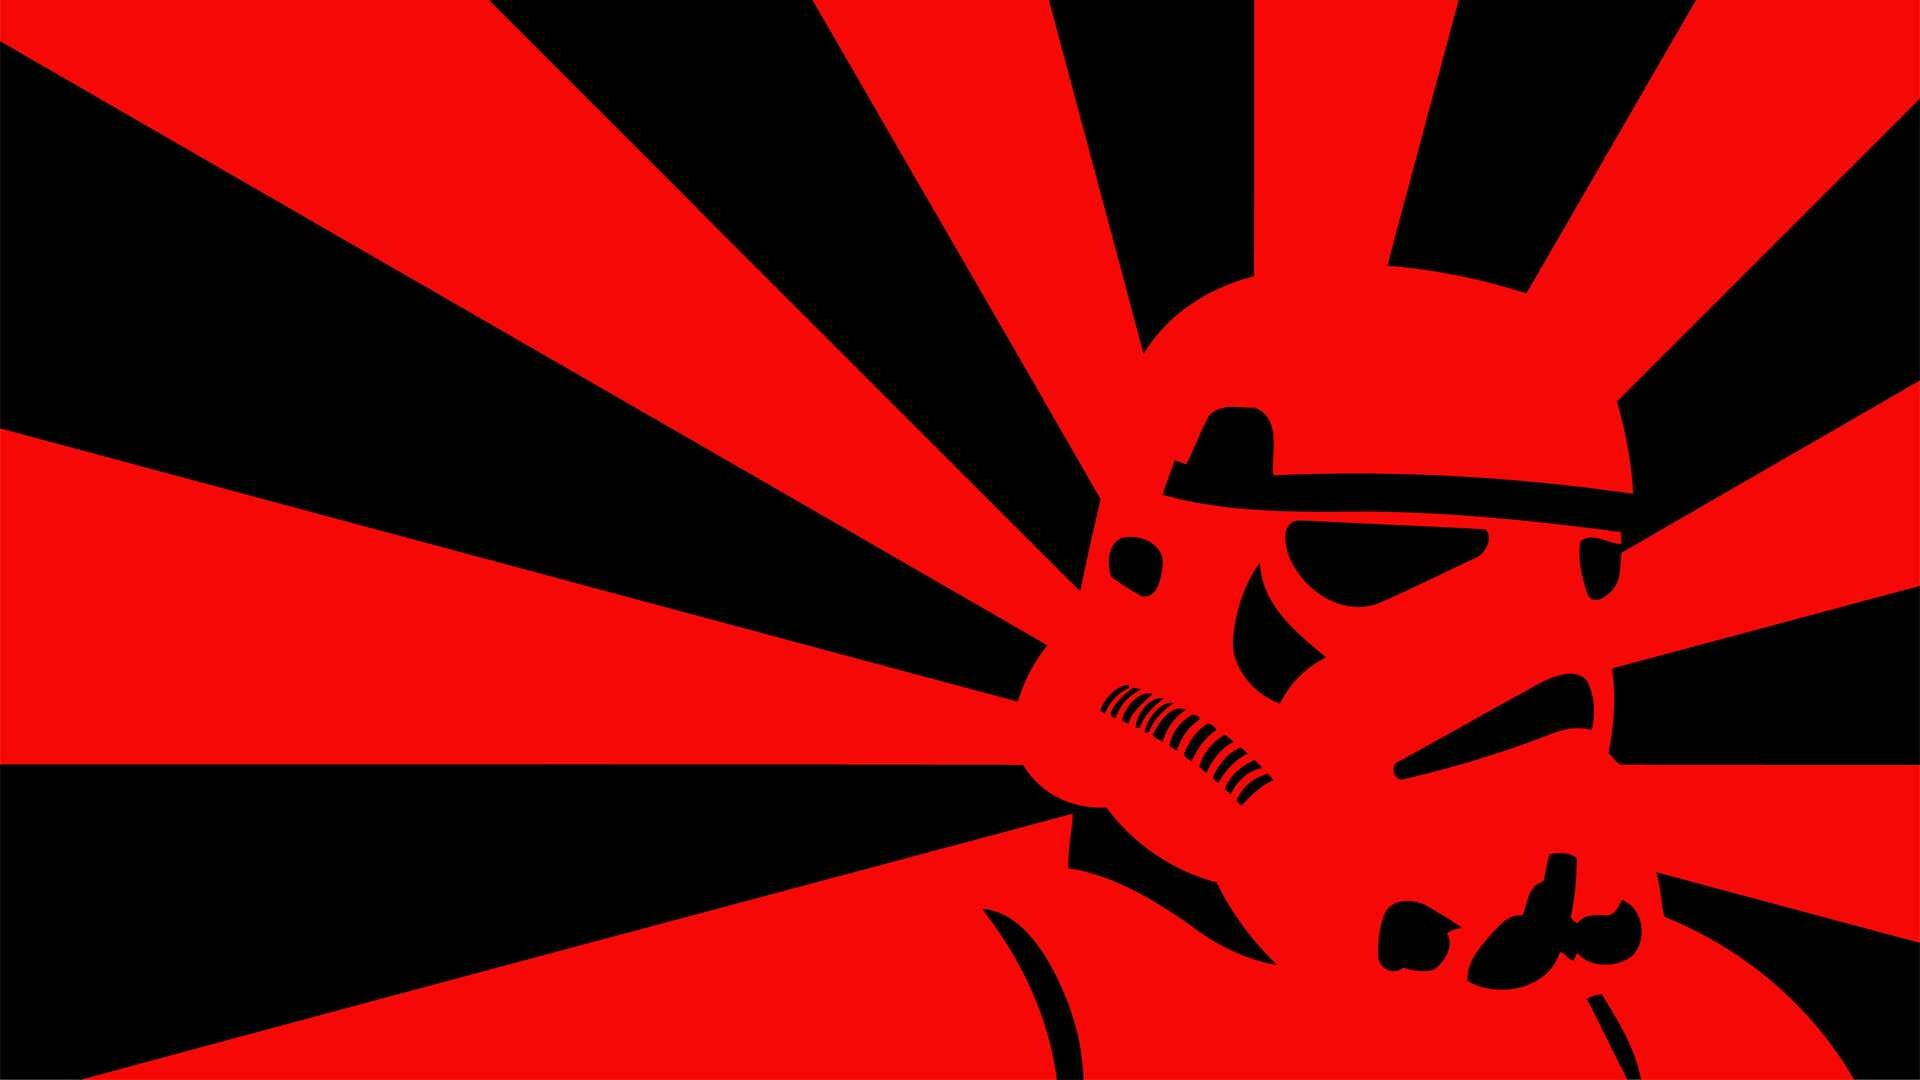 Pop Art: Stormtrooper, Soldiers in the fictional Star Wars franchise, Minimalism. 1920x1080 Full HD Background.